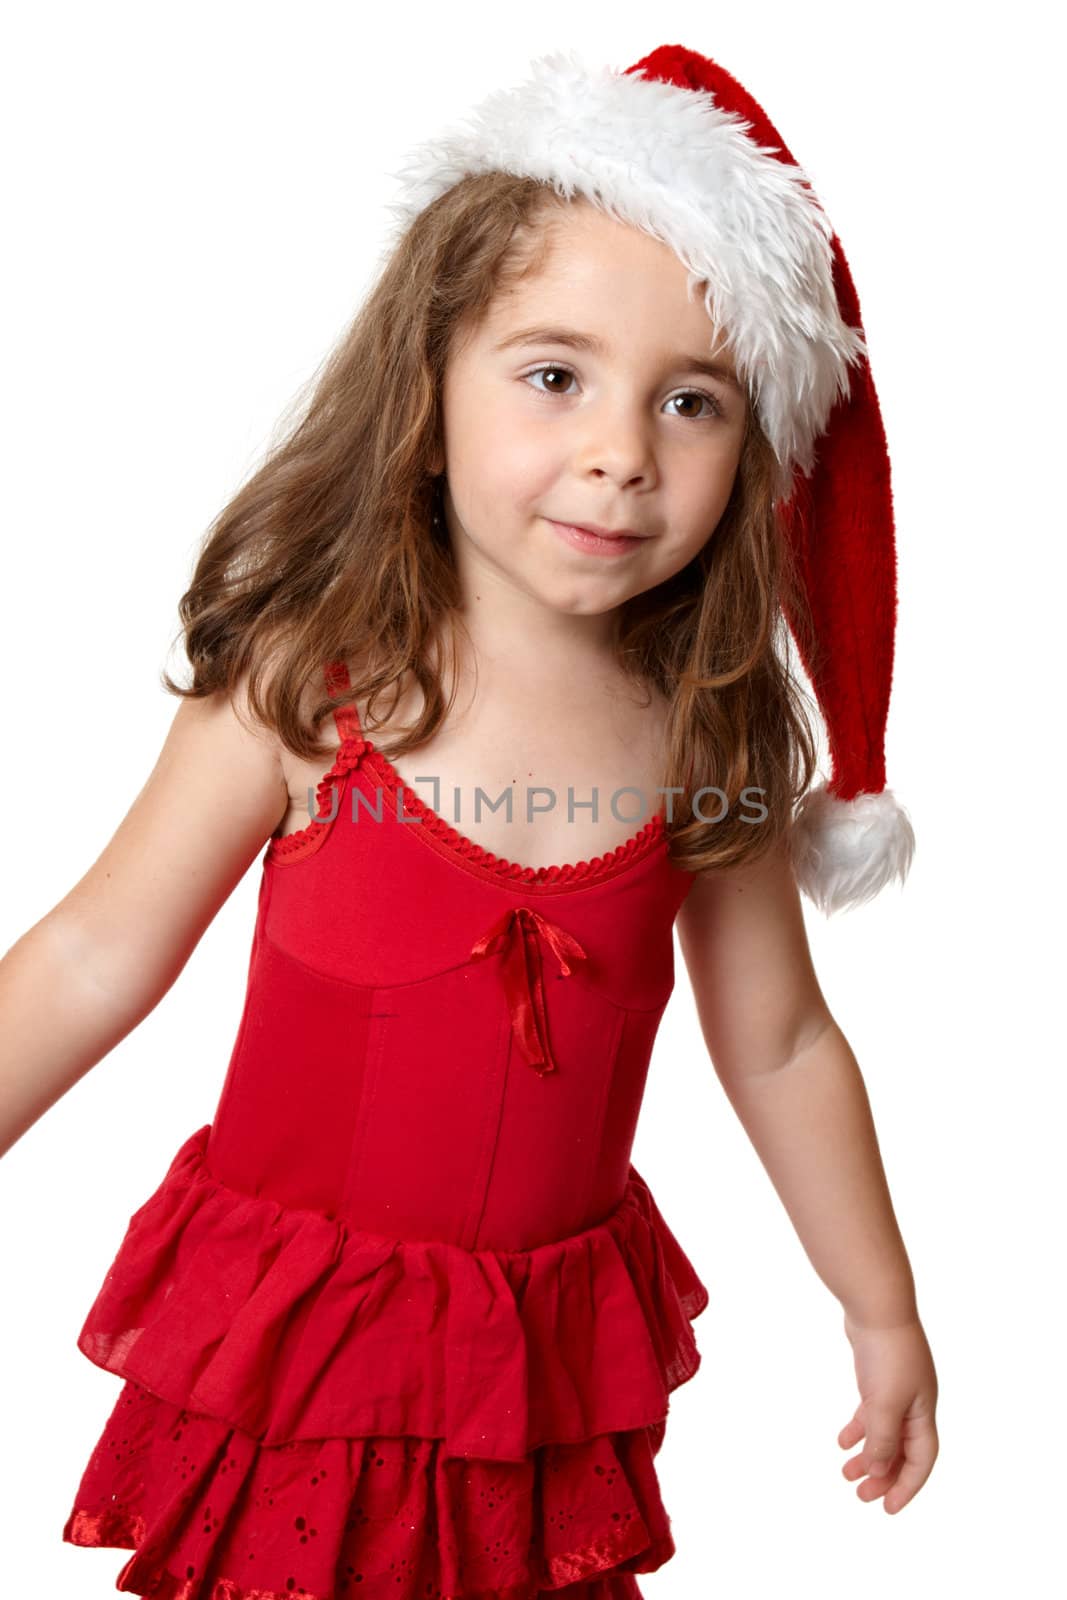 Child wearing a red Santa hat by lovleah